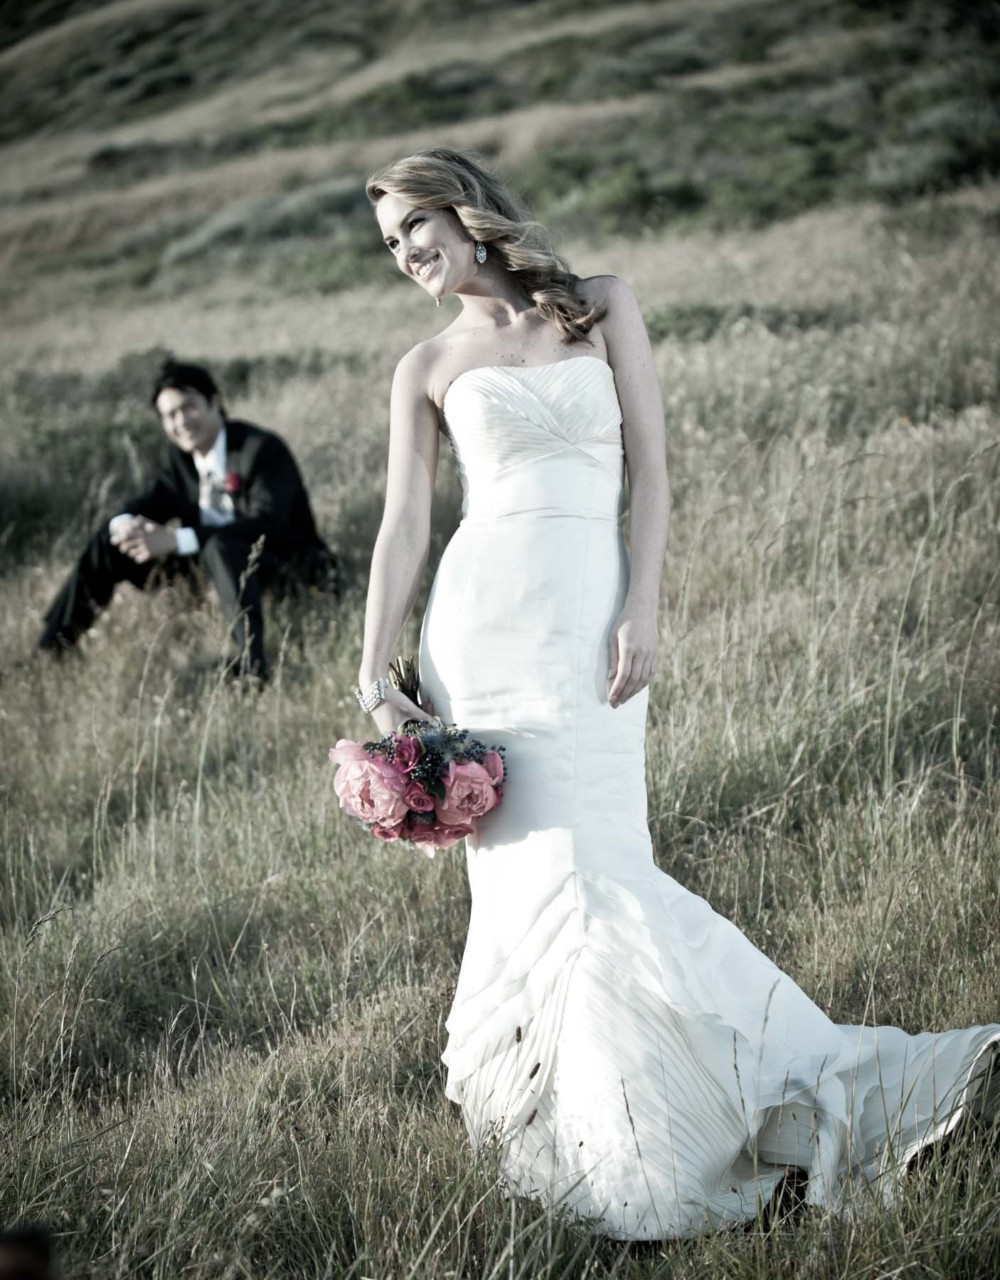 Looking for a top-rated wedding photographer in Wasilla?